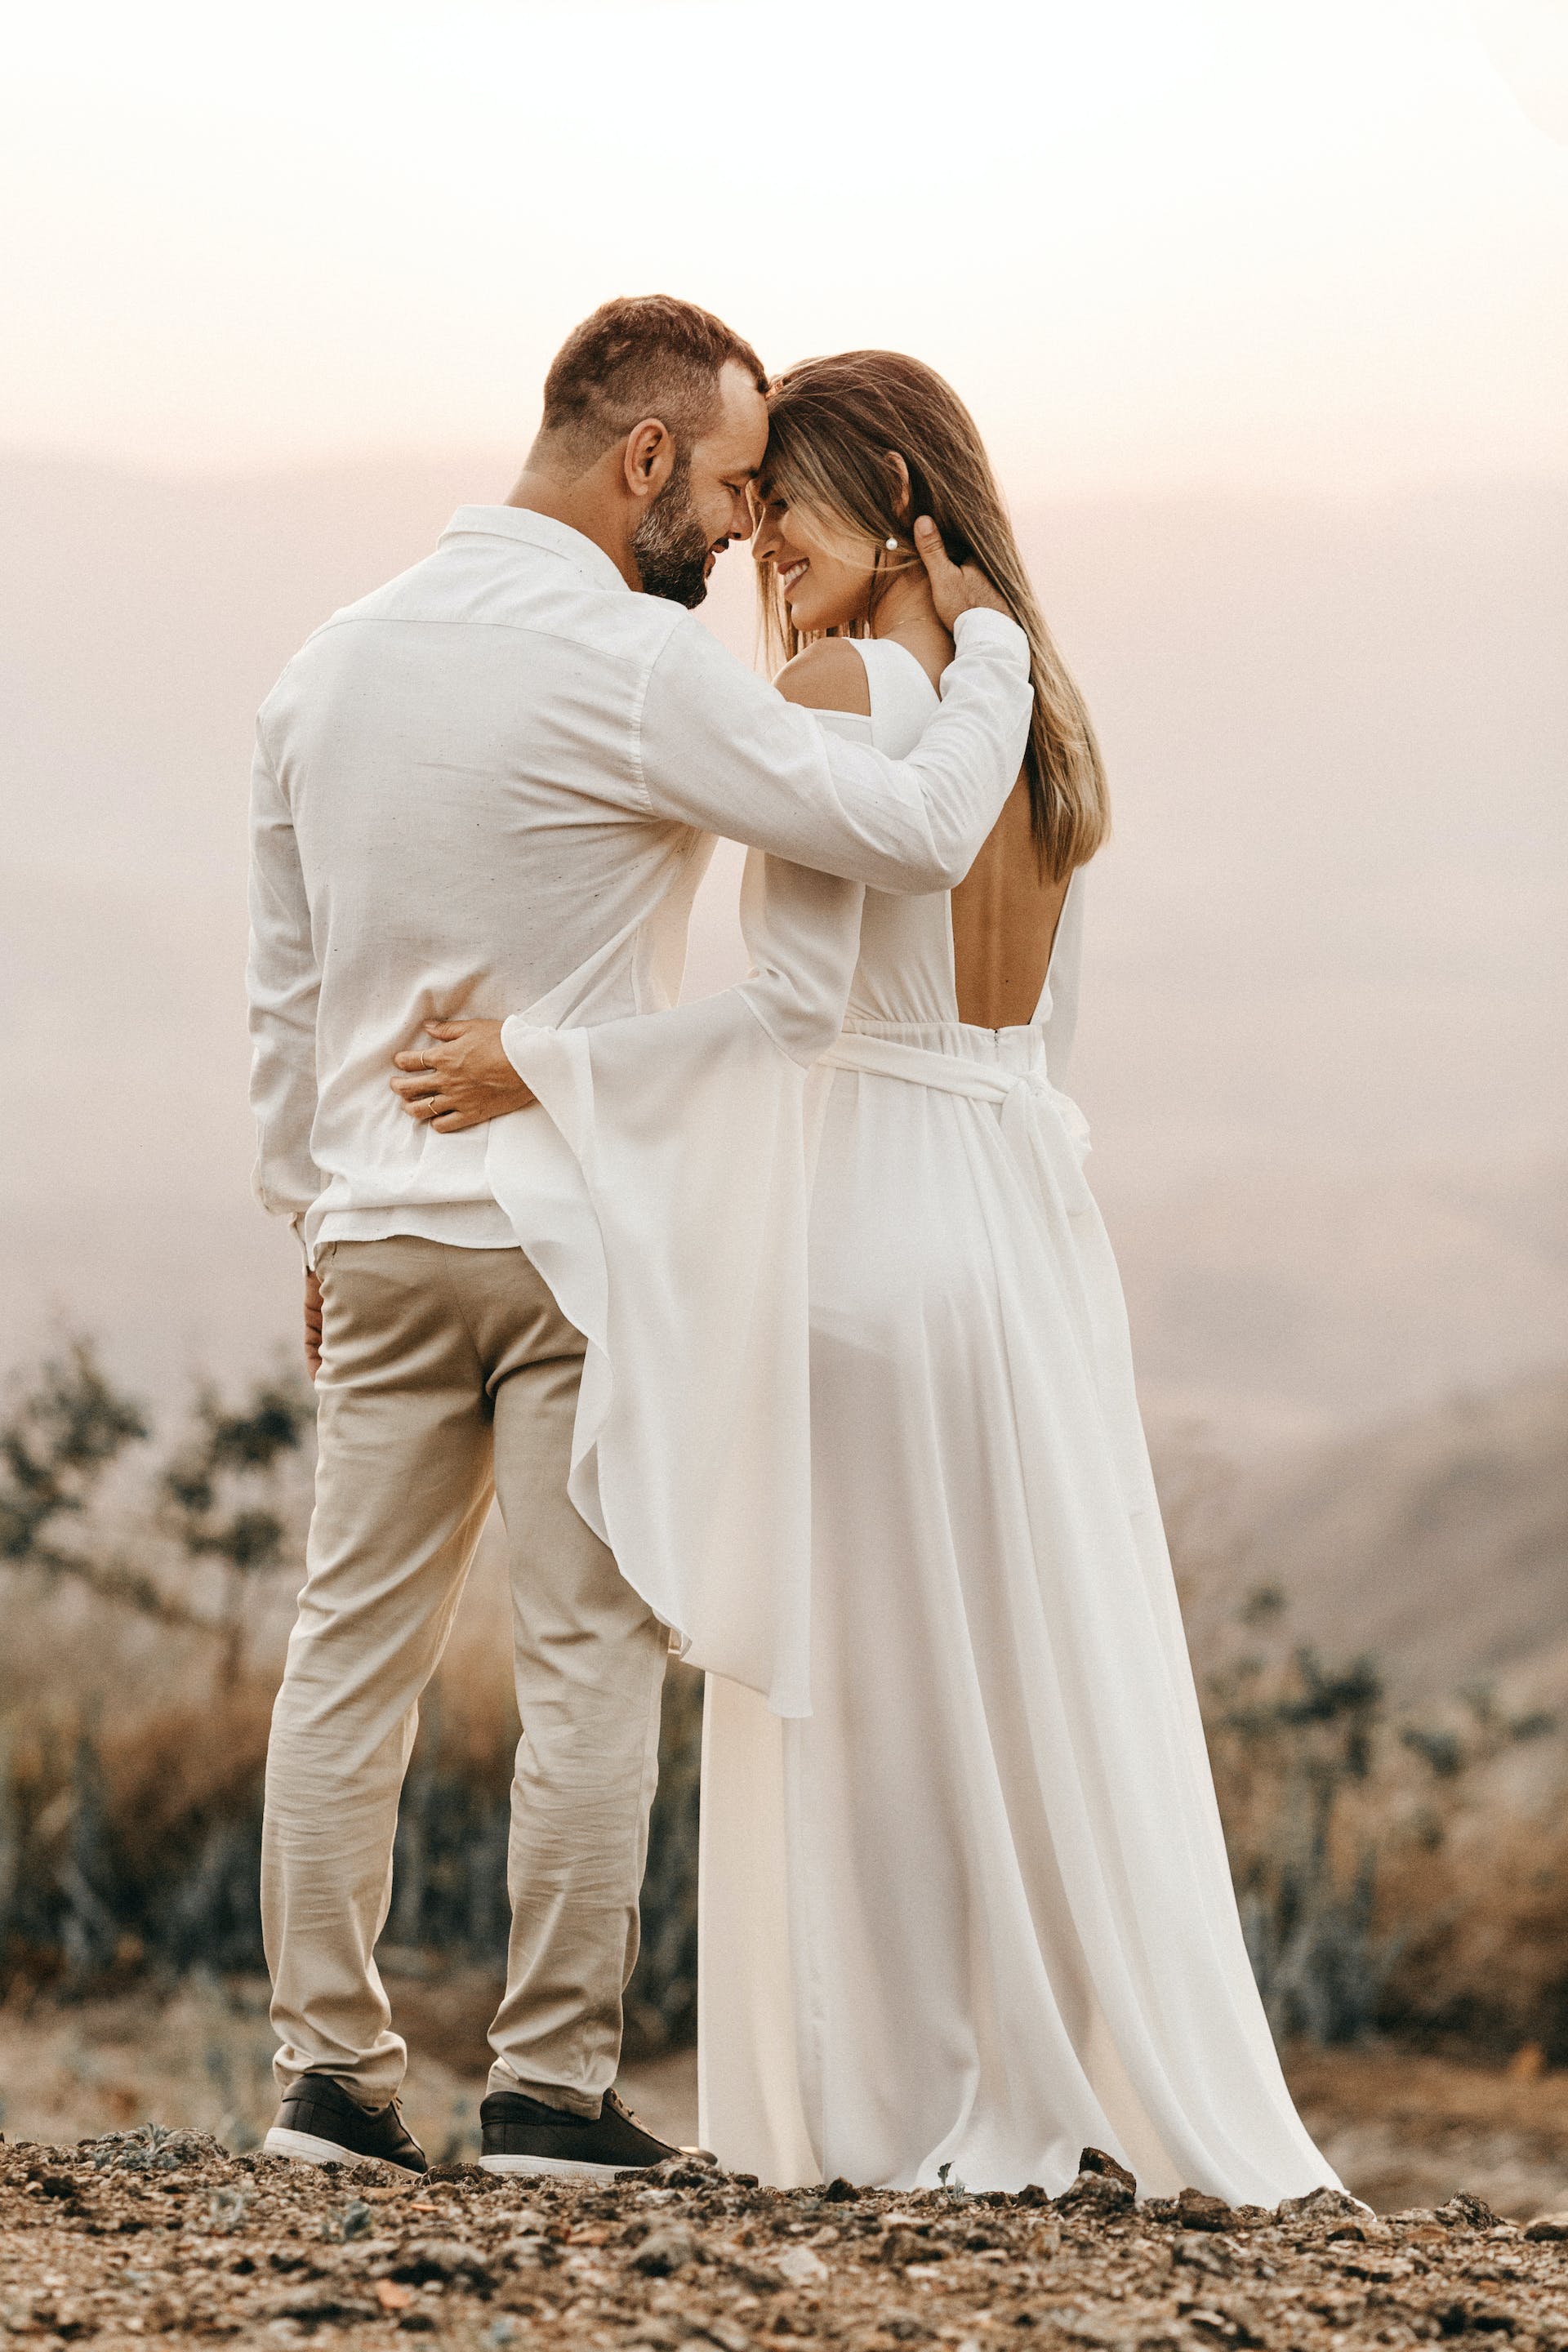 A newly-wed couple | Source: Pexels